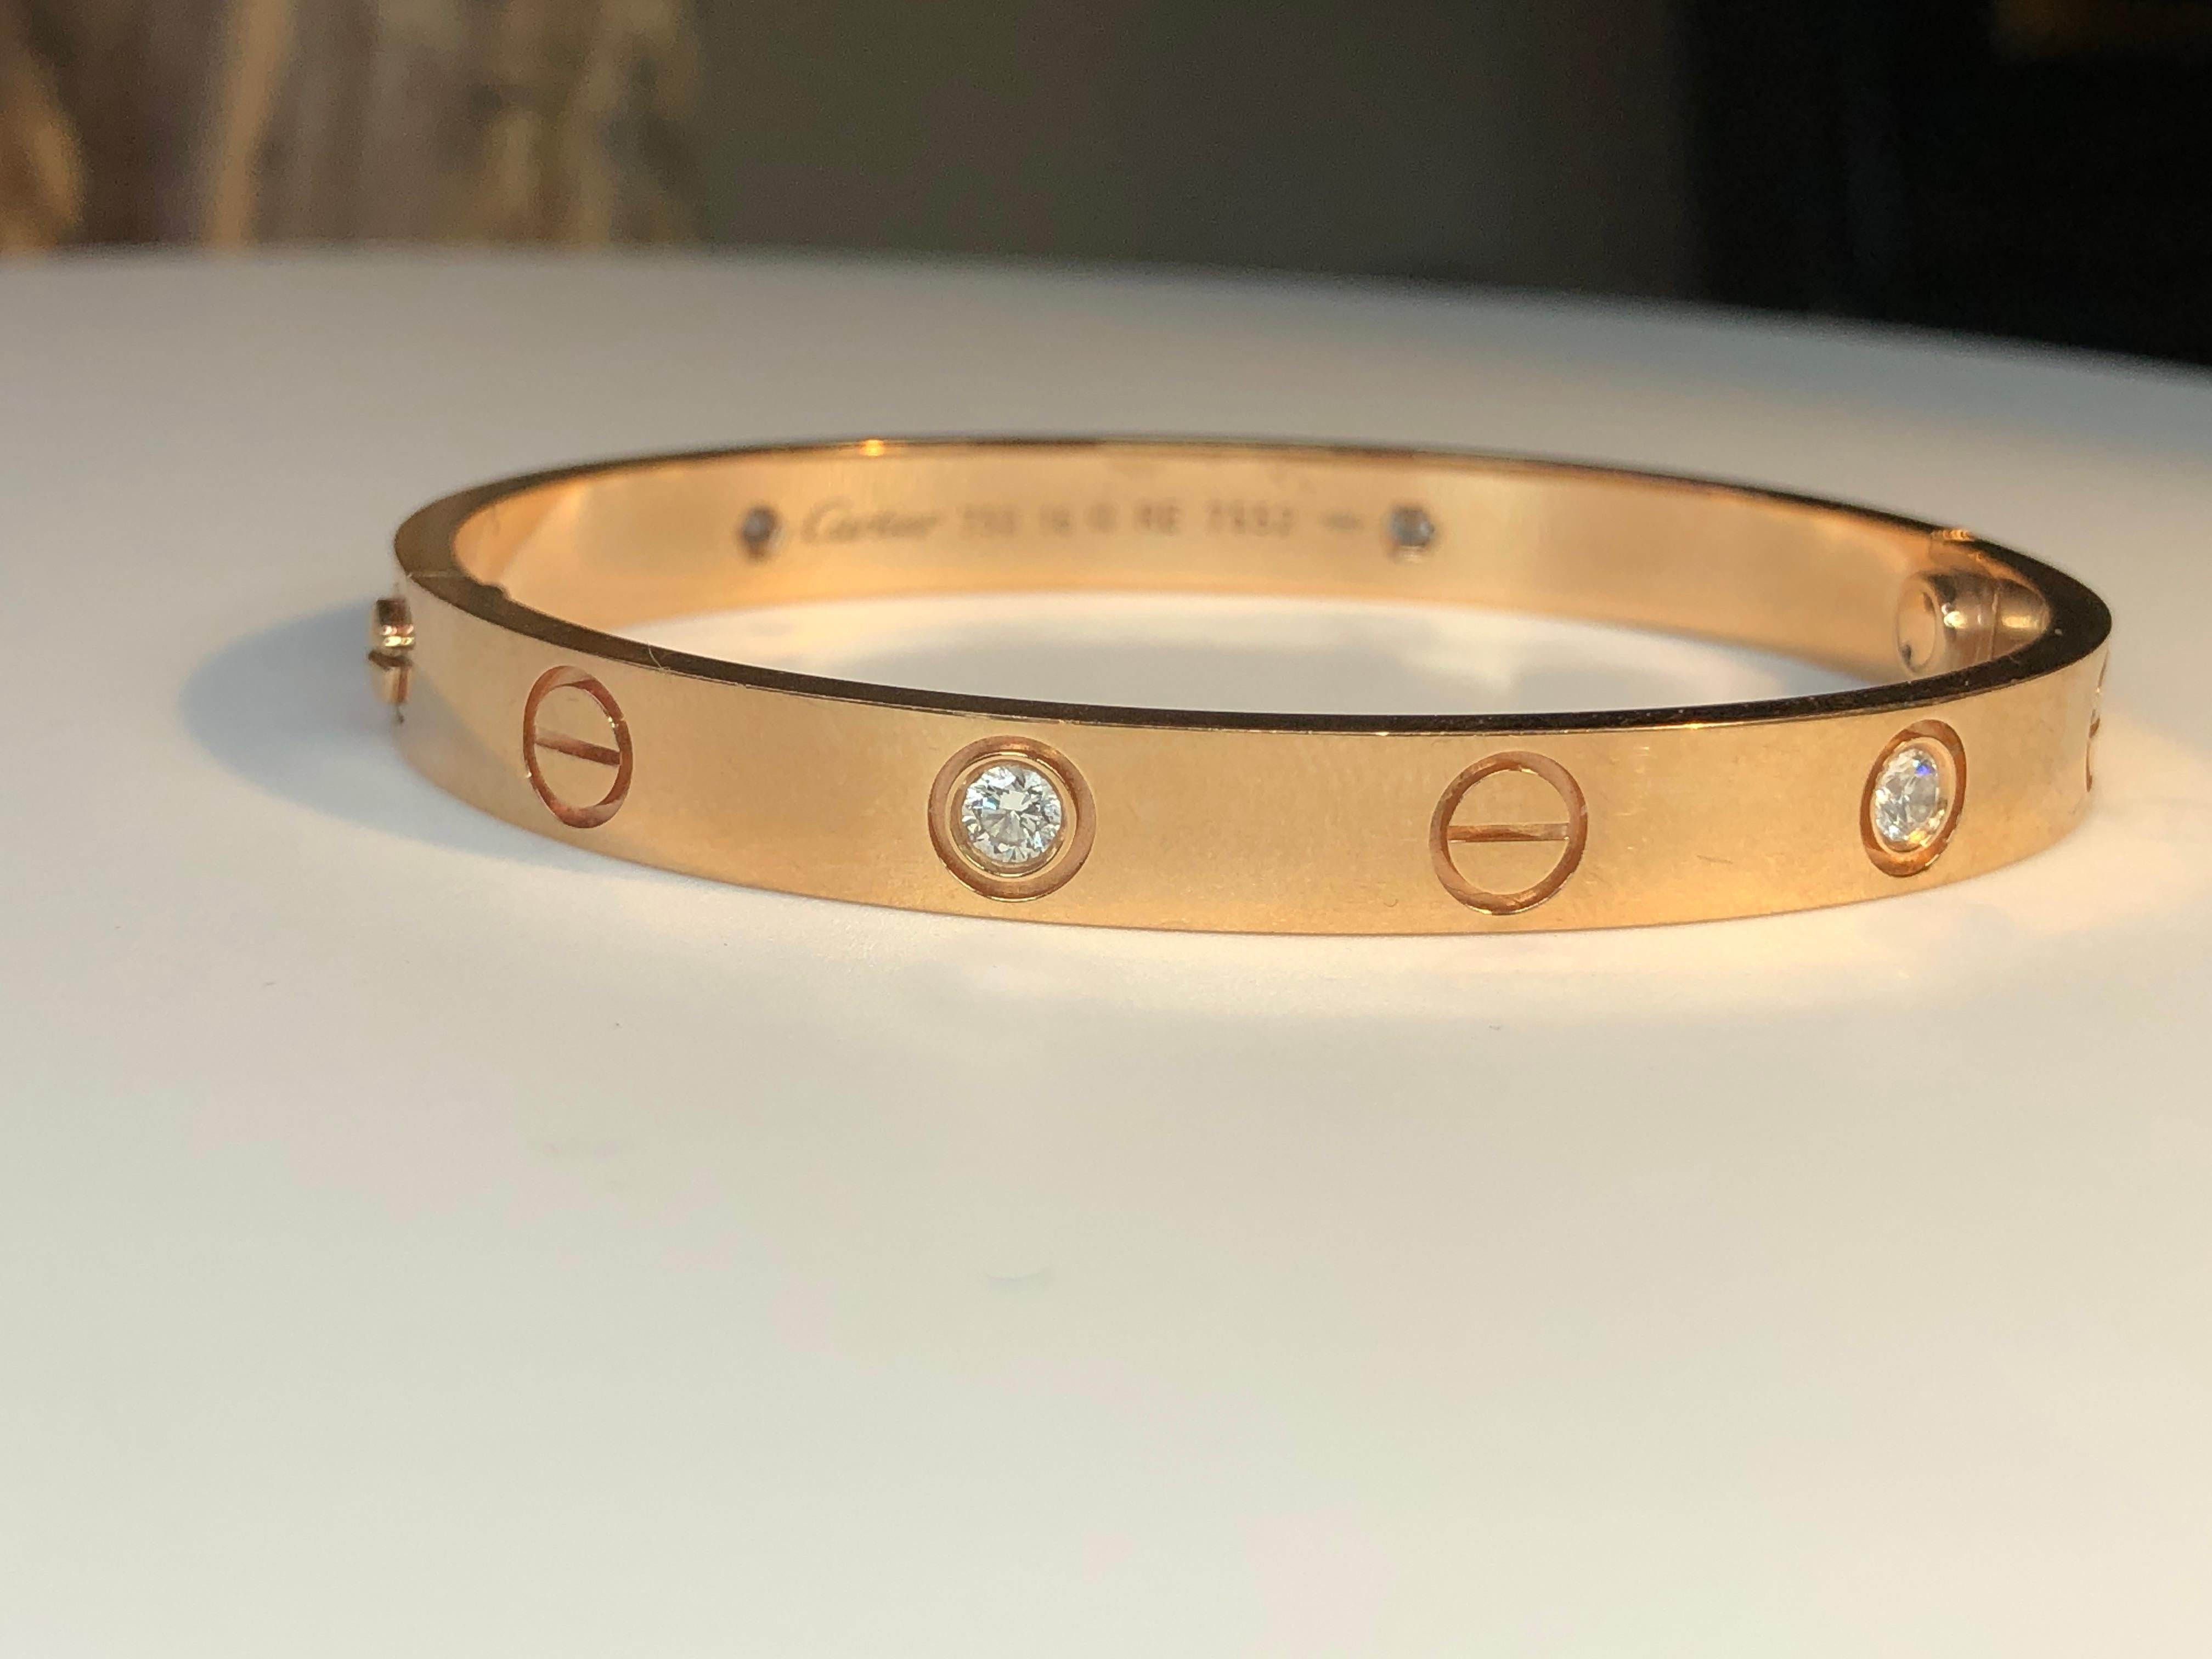 Timelessly elegant and sophisticated in its minimalist design, the iconic Love bracelet from Cartier is an instantly recognizable symbol of romance and commitment, presented in this instance in a splendid blend of 18K gold and four sparkling